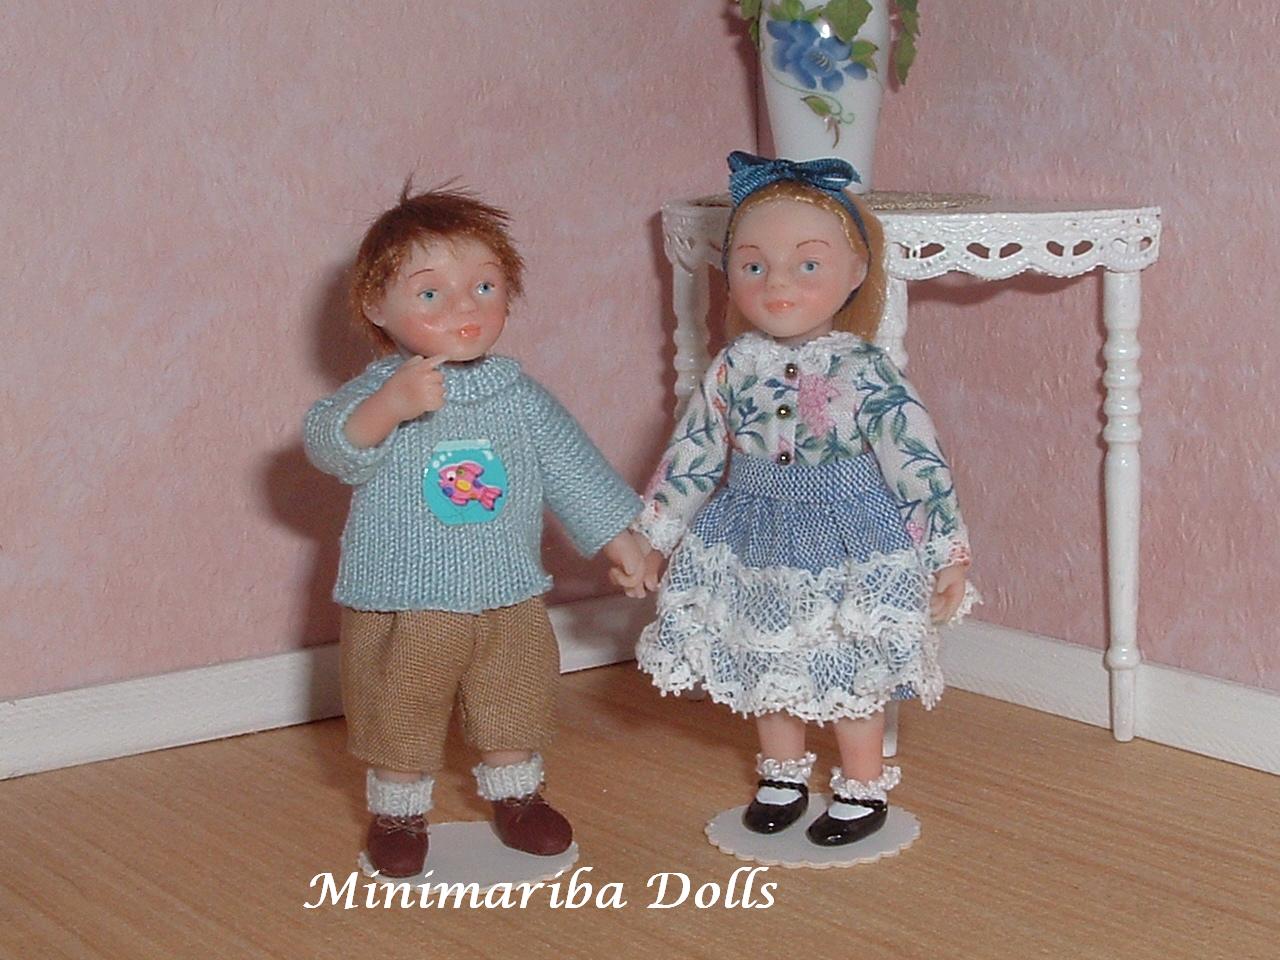 CDHM Artisan Mariarita Baldan of Minimariba Dolls creates 1:12 hand sculpted polymer clay dolls, dressed and wigged, painted details for dollhouse minaitures, including child posed dolls